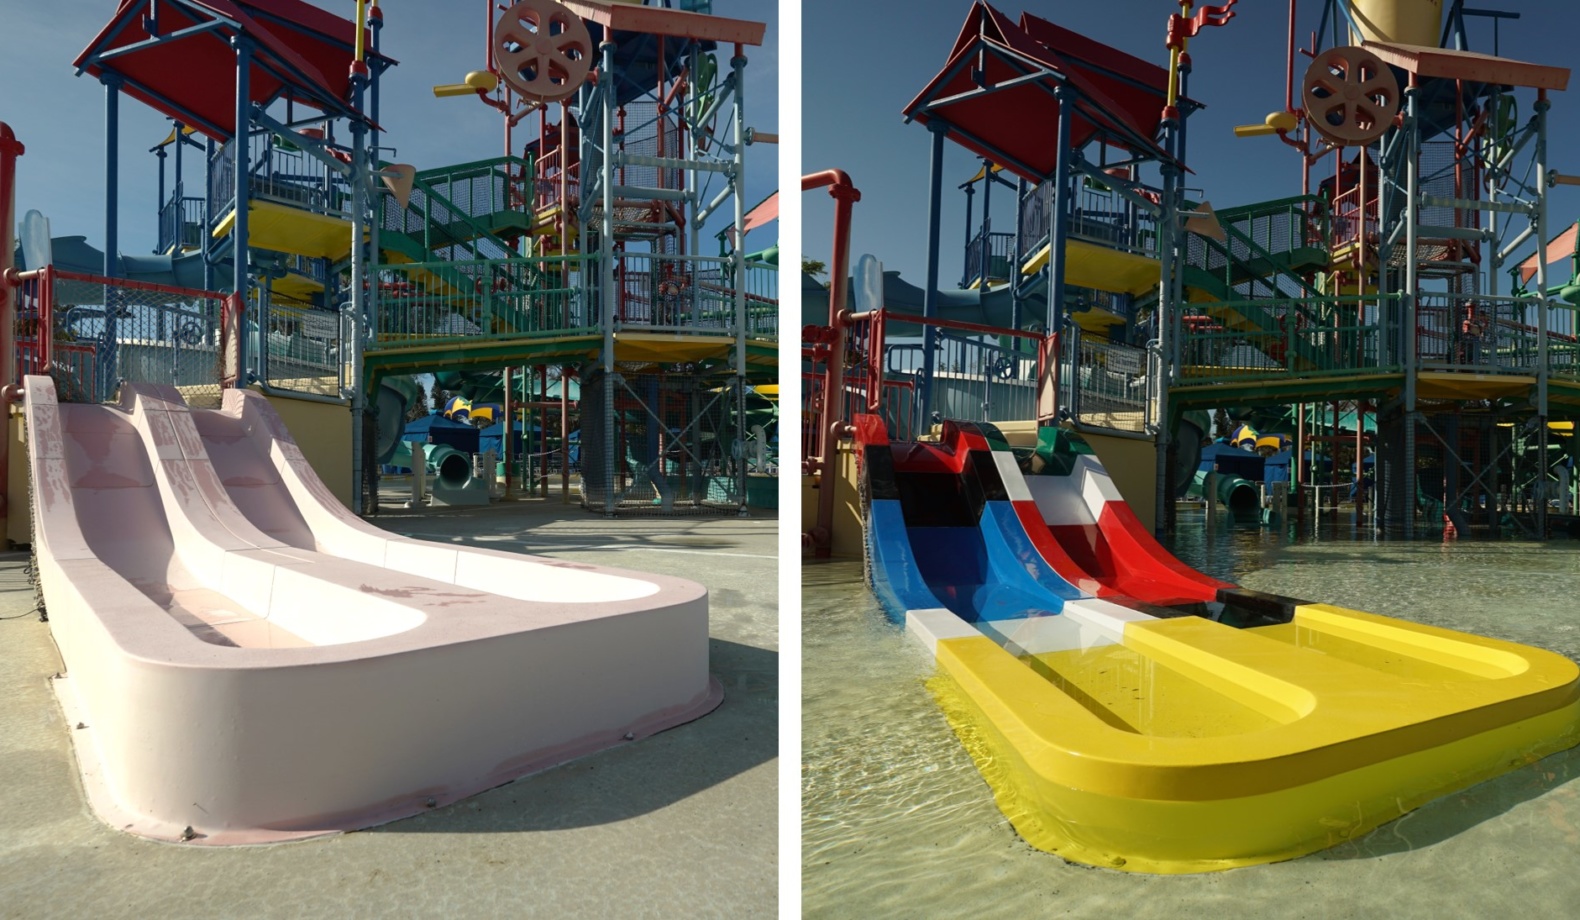 Side-by-side comparison of water slide before and after refurbishment